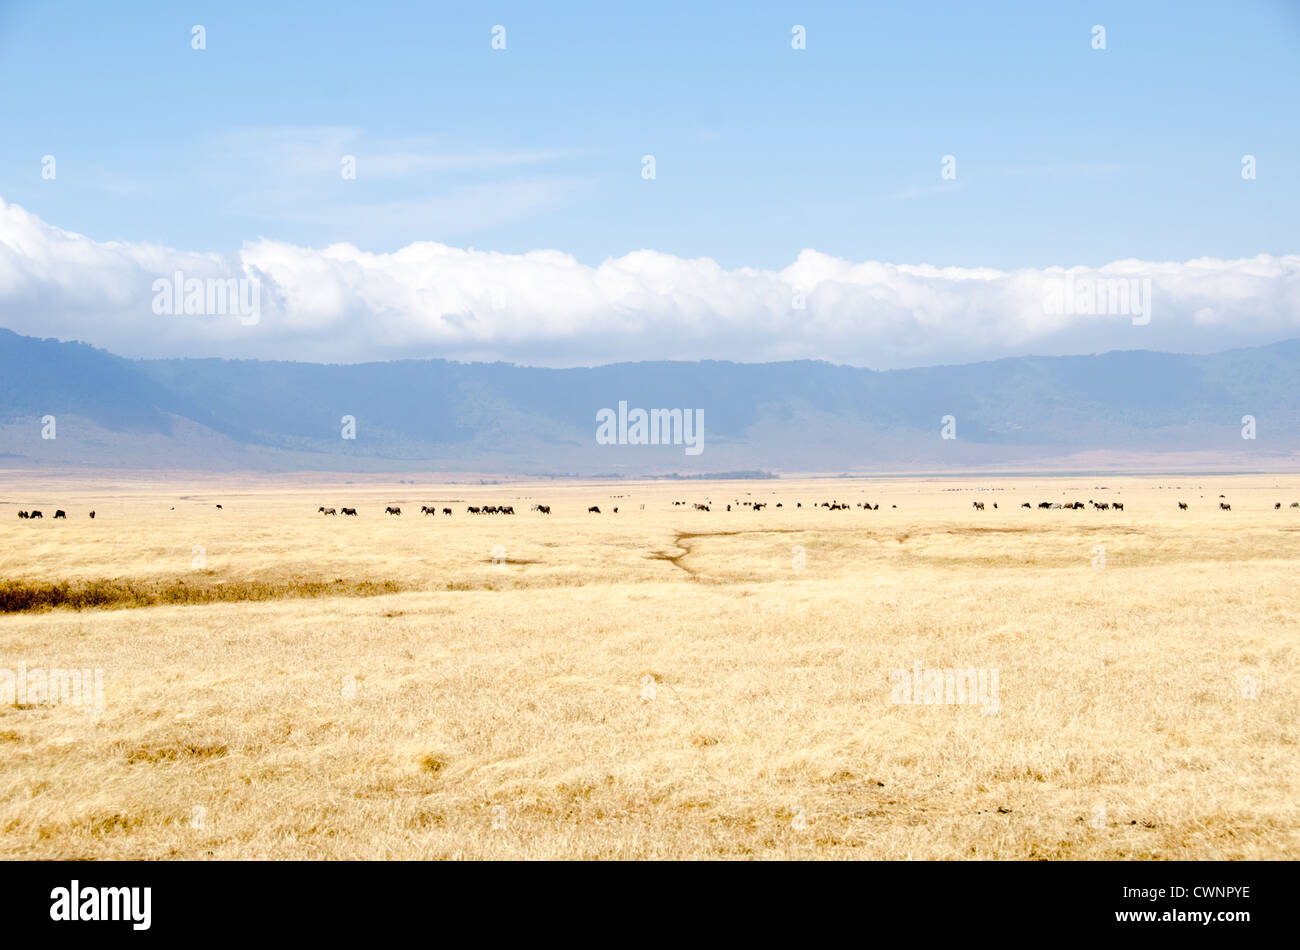 NGORONGORO CONSERVATIONAL AREA, Tanzania - The grassy plains of the Ngorongoro Crater in the Ngorongoro Conservation Area, part of Tanzania's northern circuit of national parks and nature preserves. Stock Photo